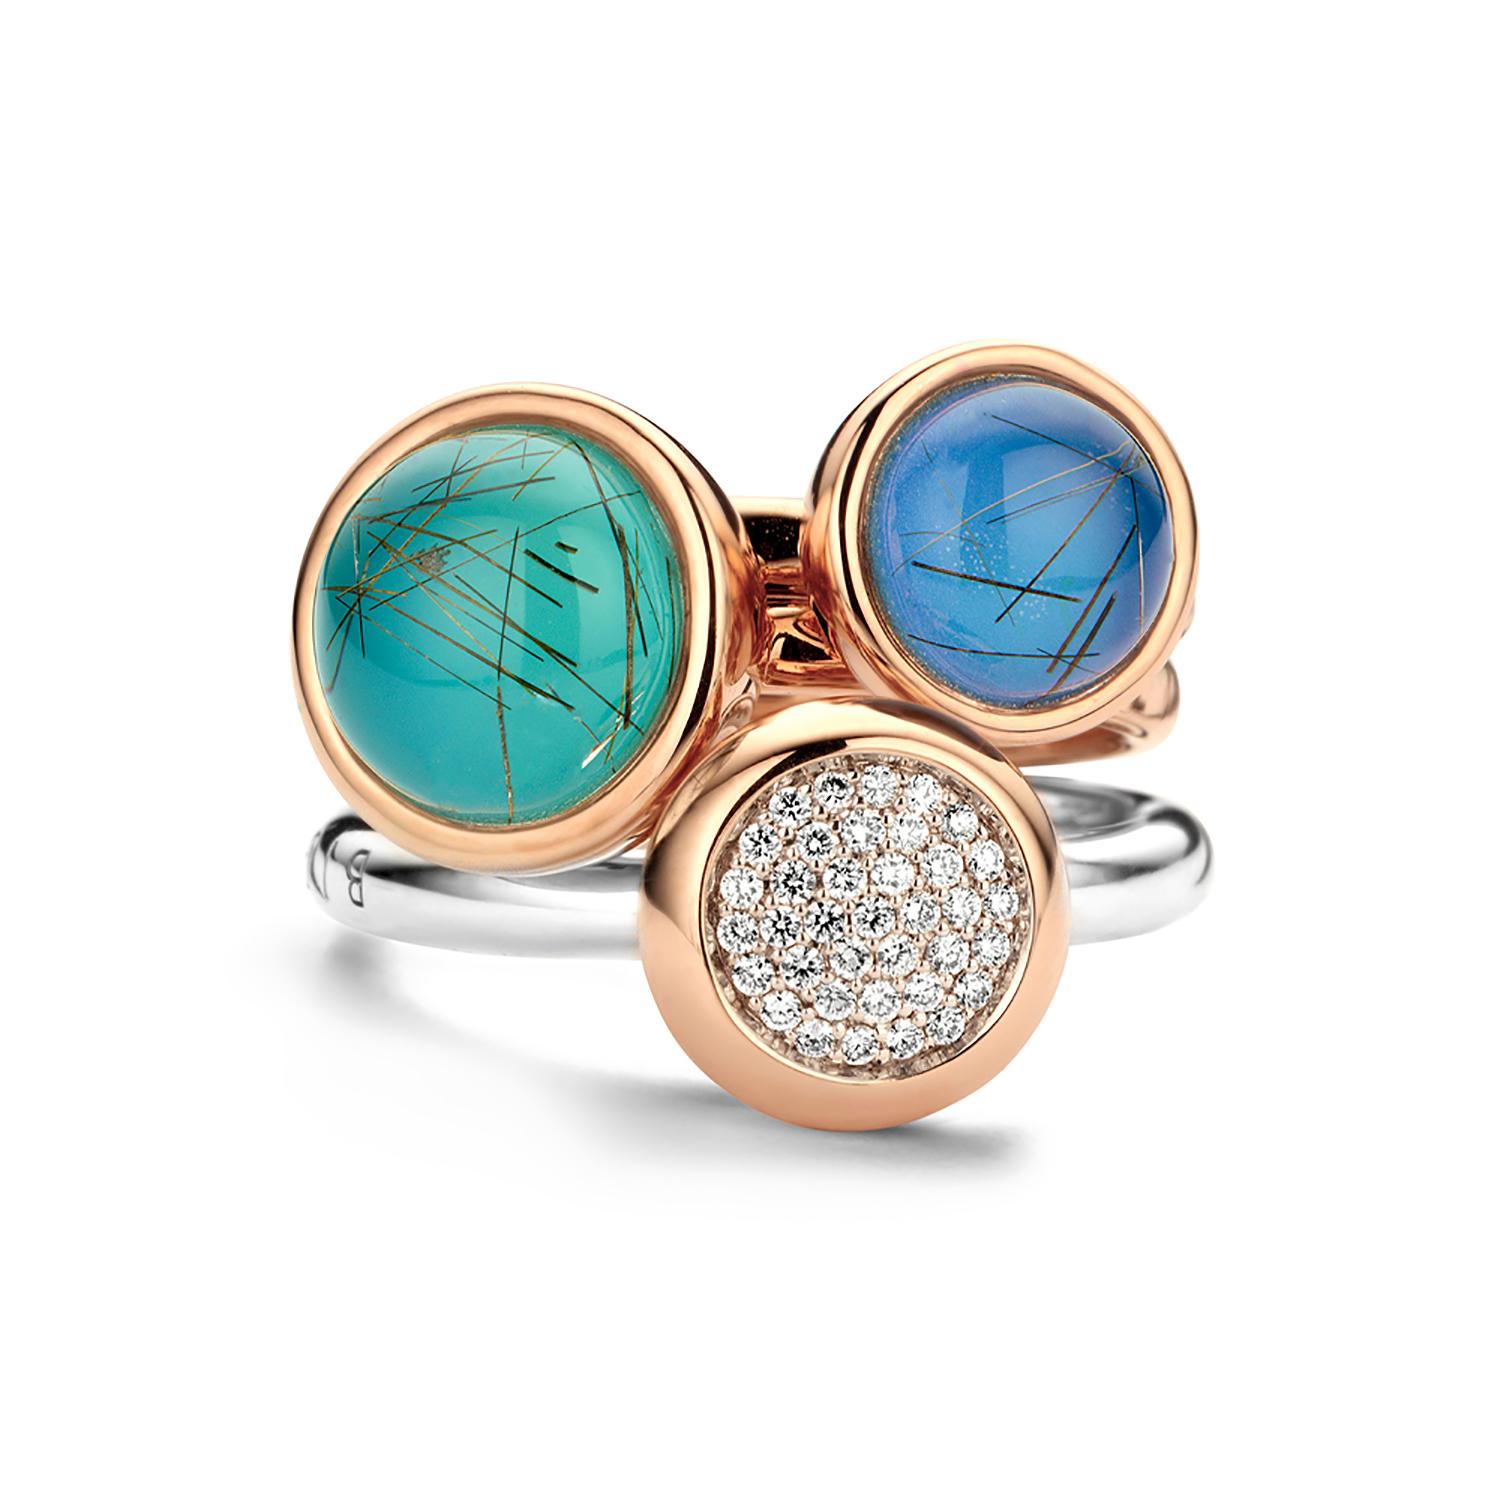 Moments ring in 18ct pink gold with rutile quartz, azurro agate and a signature diamond (0,01 ct)

Reference: 20R119Rrutagazzmp
Stone combination: rutile quartz, azurro agate
Diamond: 0,01 ct

Please note that this ring has a delivery time of 1 to 2